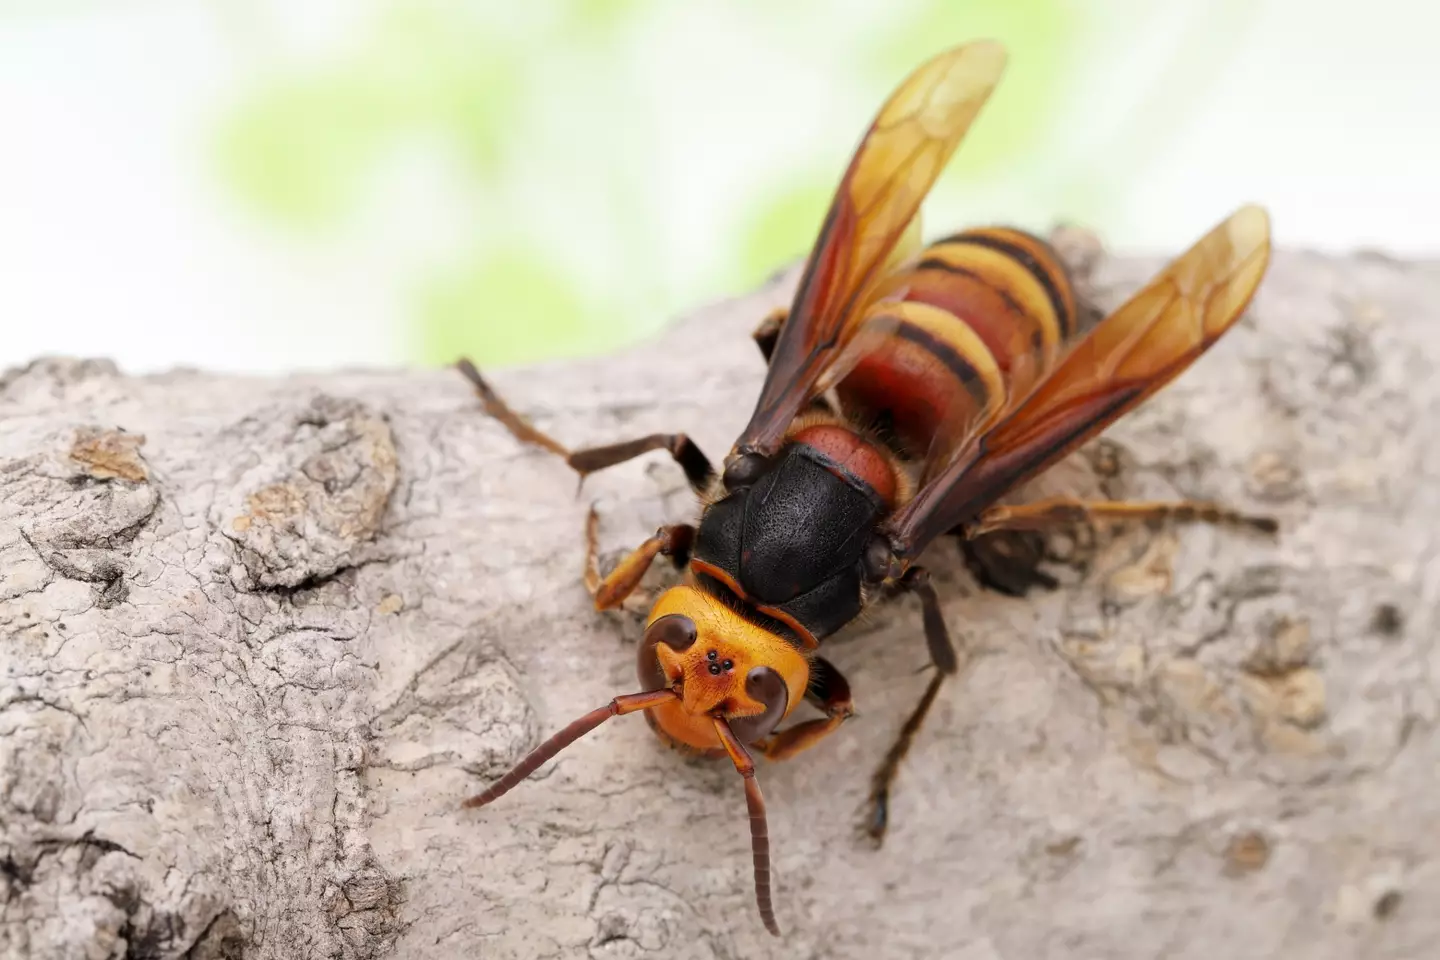 The name has now been changed to the northern giant hornet.